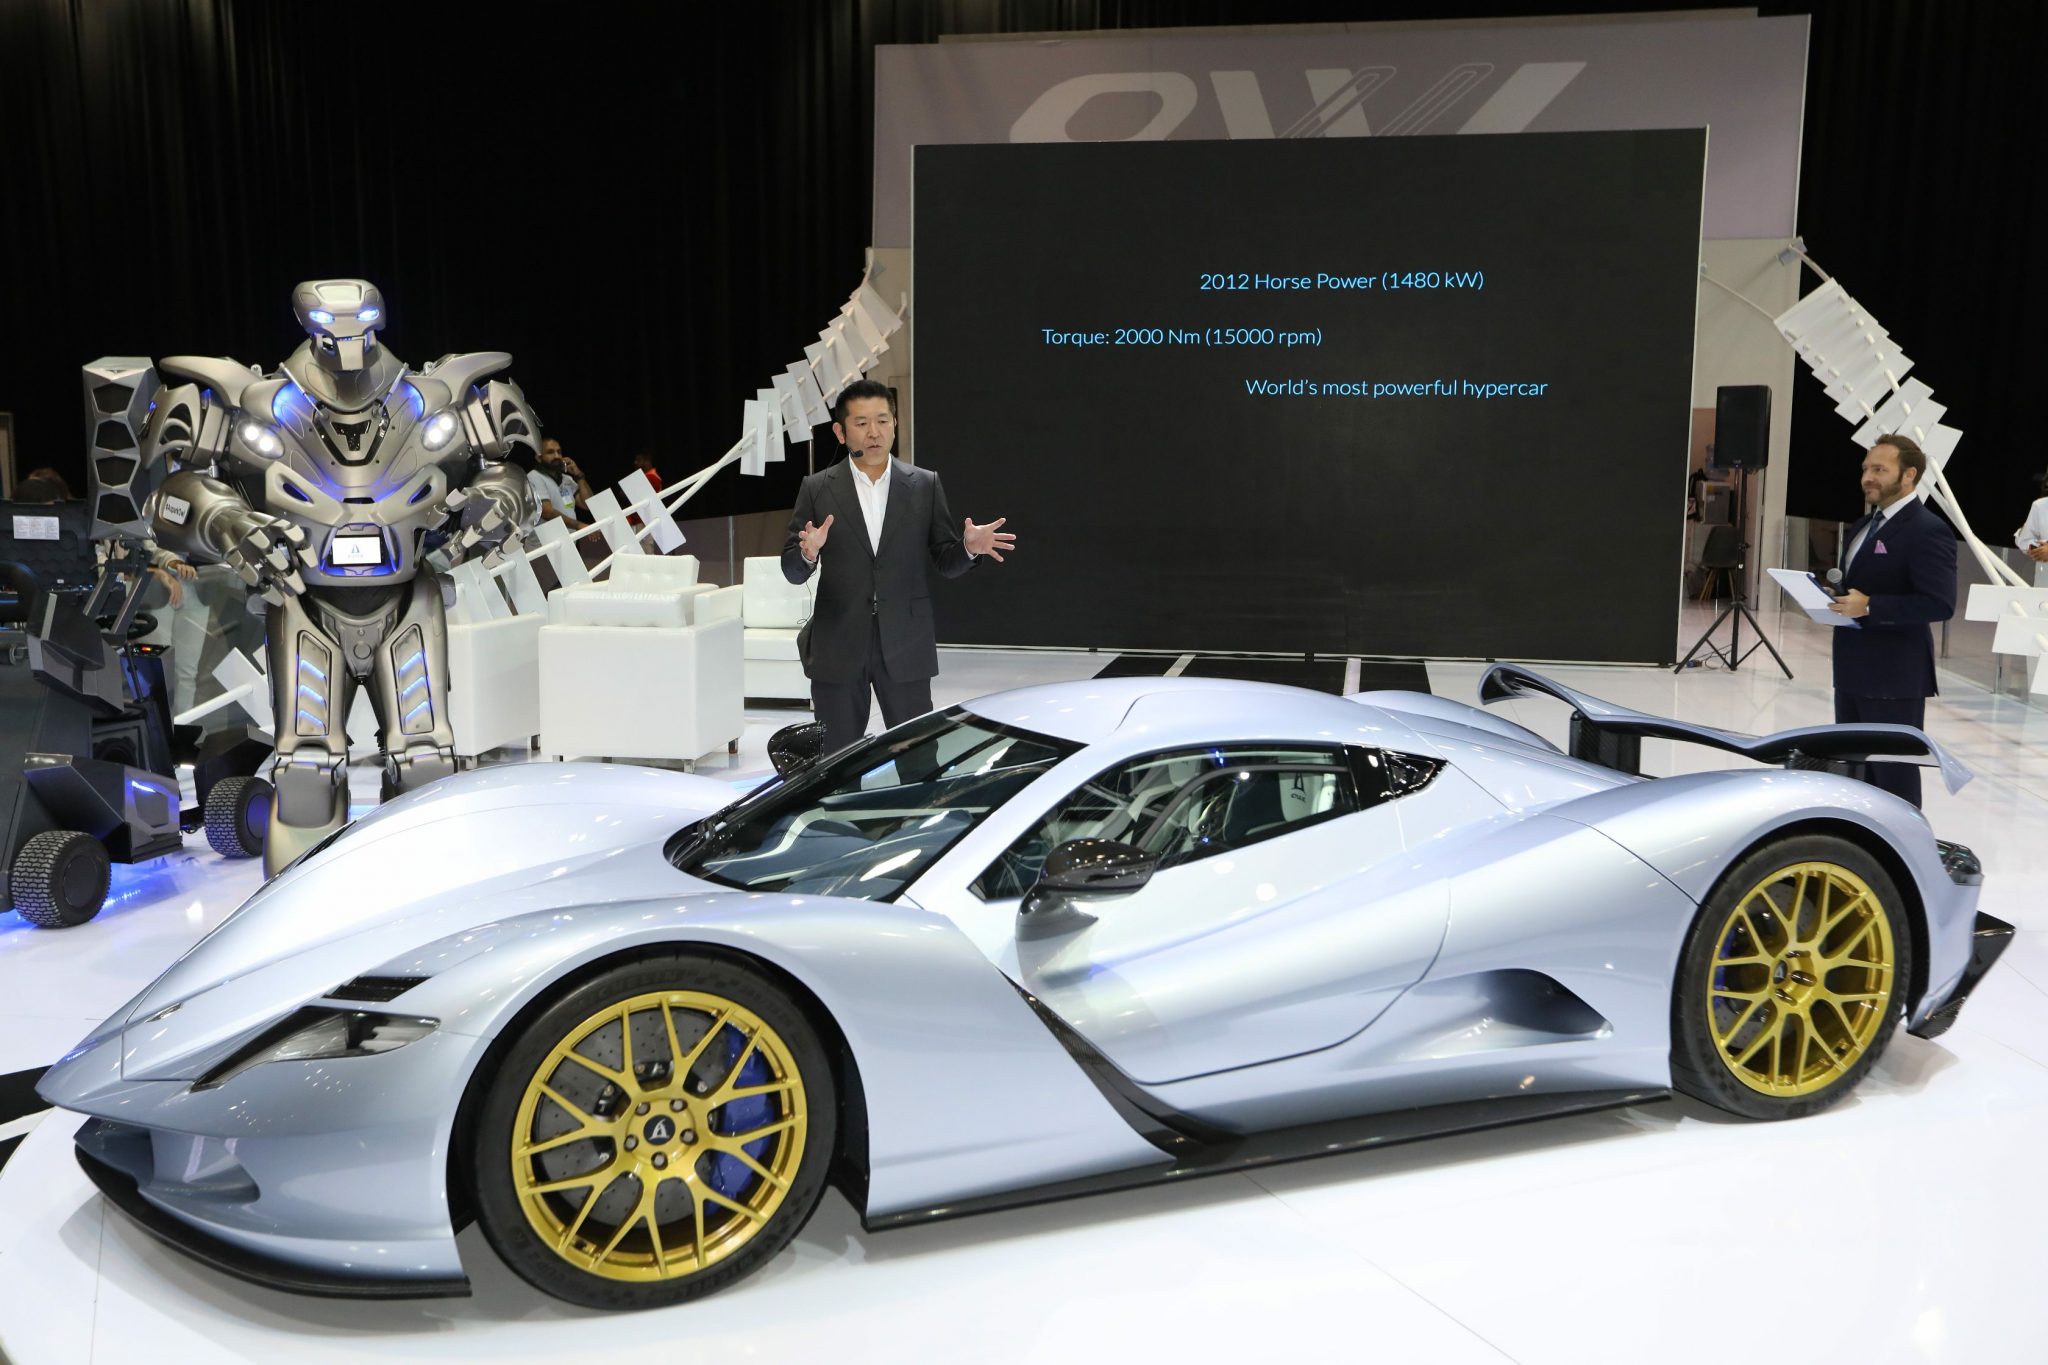 Titan the Robot at the launch of the Aspark Owl, the worlds fastest hyper car in Dubai, UAE